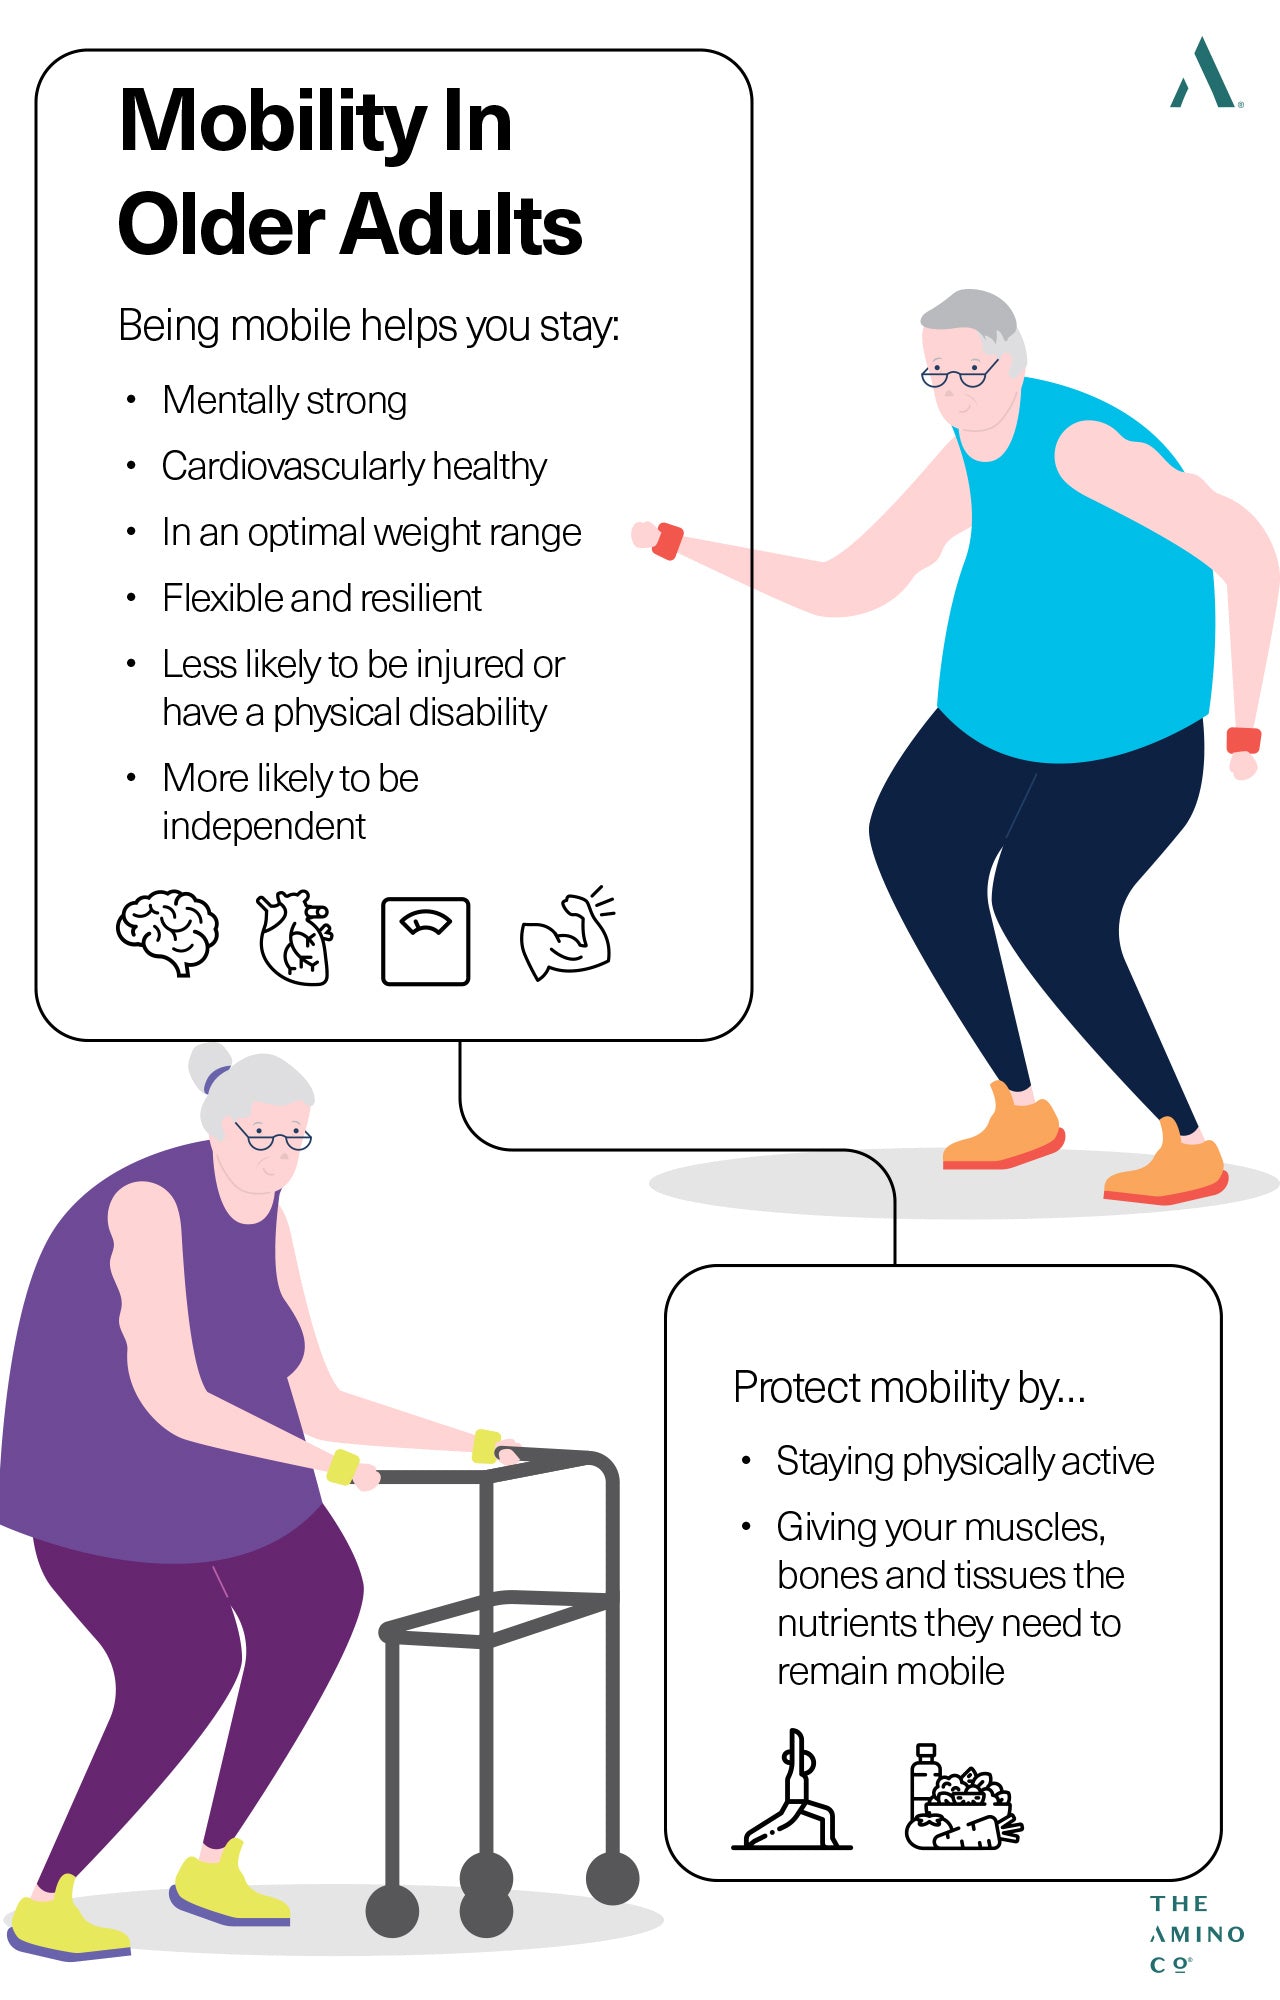 Tips for mobility in older adults